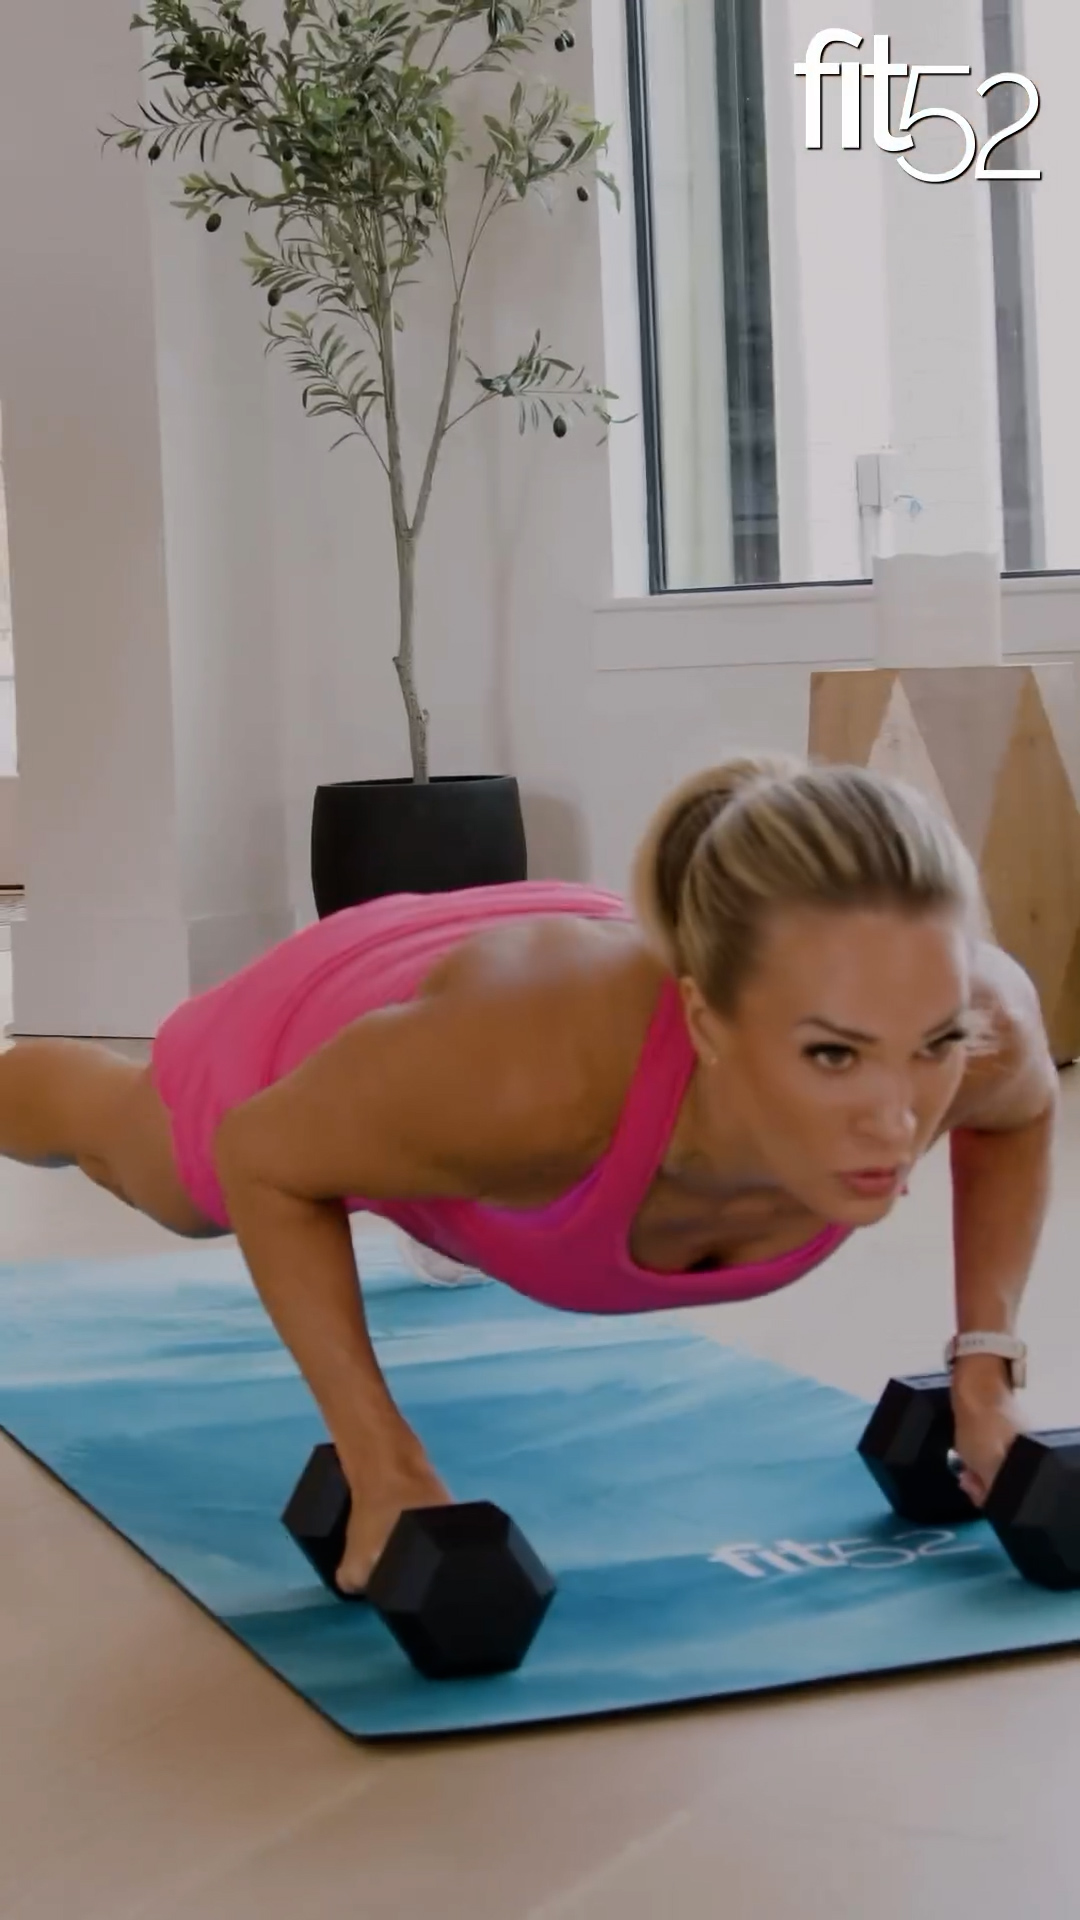 American Idol star Carrie Underwood doing a grueling workout in a new social media video